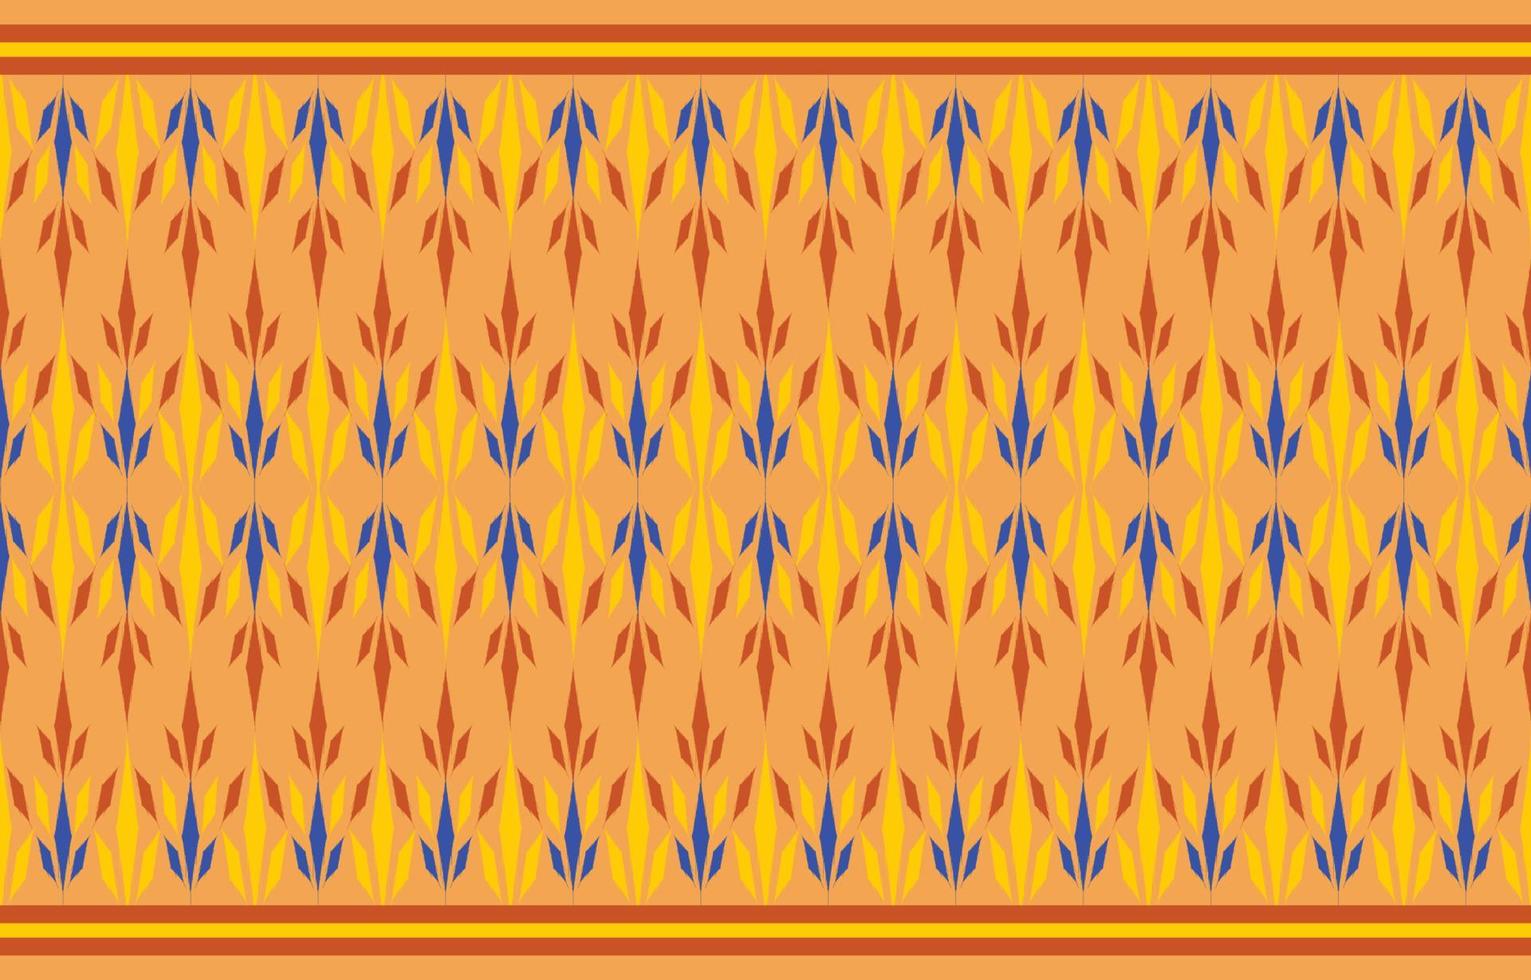 Beautiful Ethnic abstract ikat art. Seamless Kasuri pattern in tribal,folk embroidery,and Mexican style.Aztec geometric art ornament print.Design for carpet,wallpaper, clothing,wrapping,fabric,cover vector